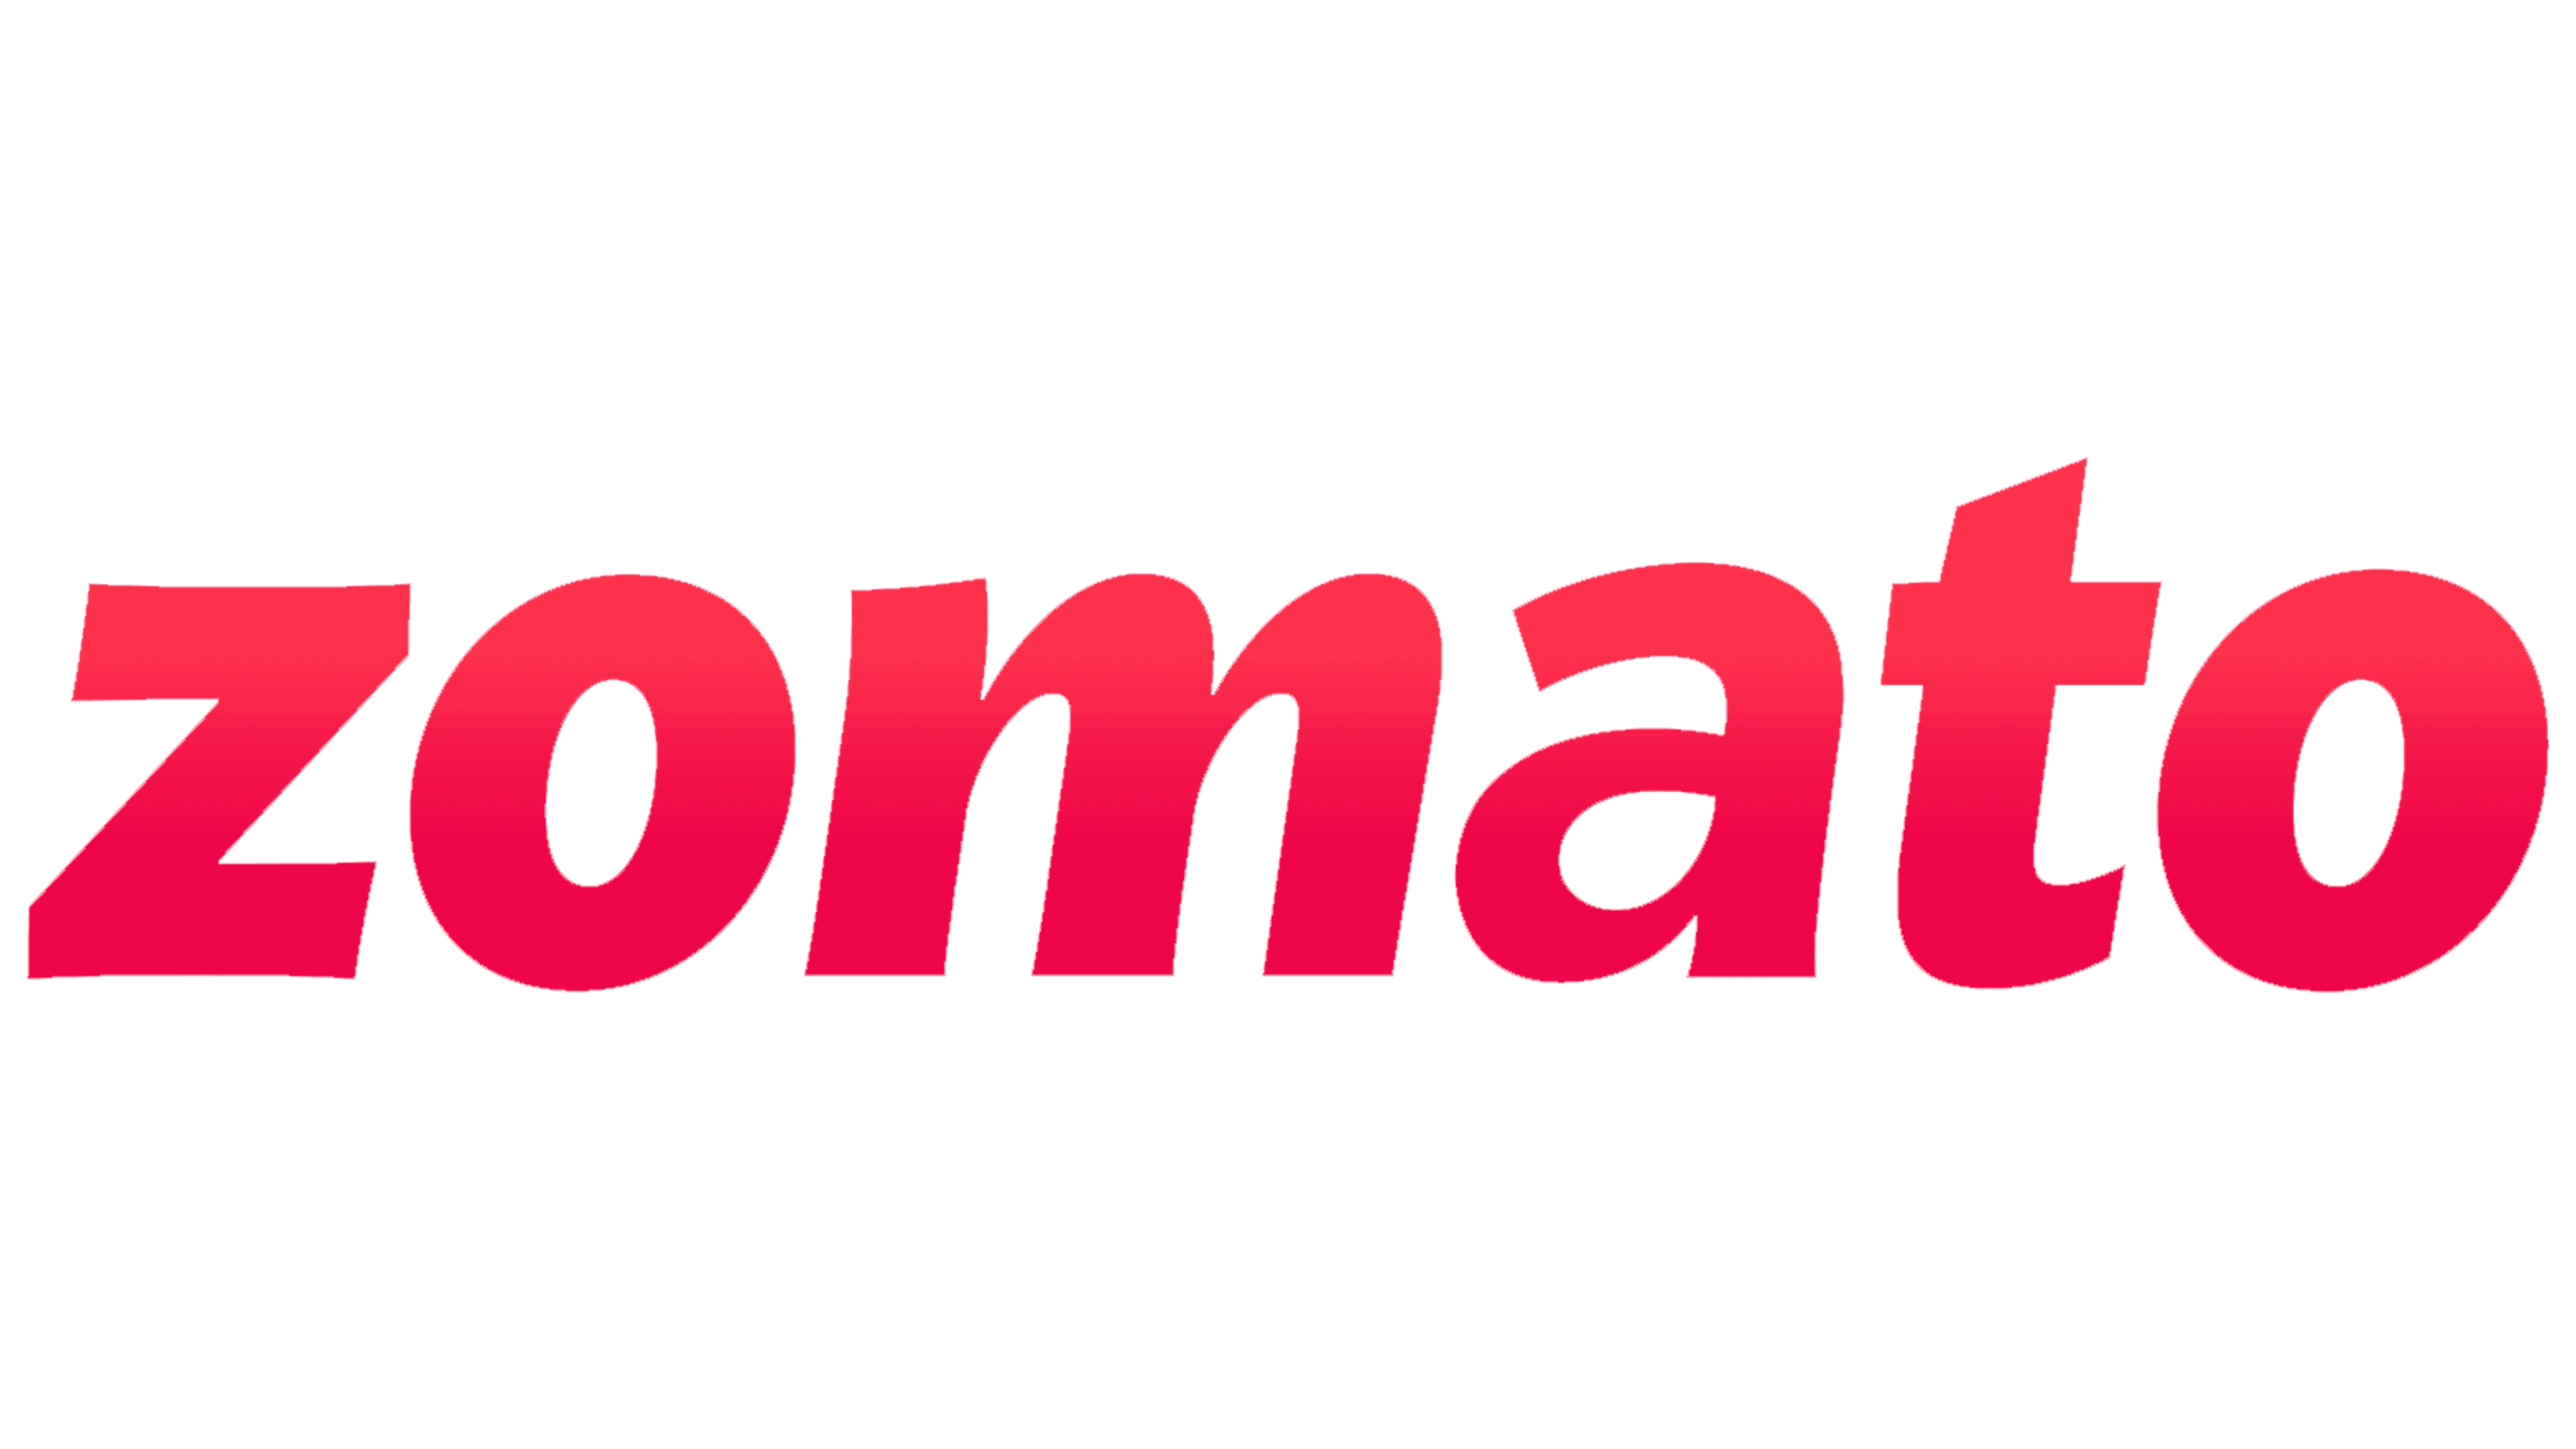 Zomato Logo, symbol, meaning, history, PNG, brand